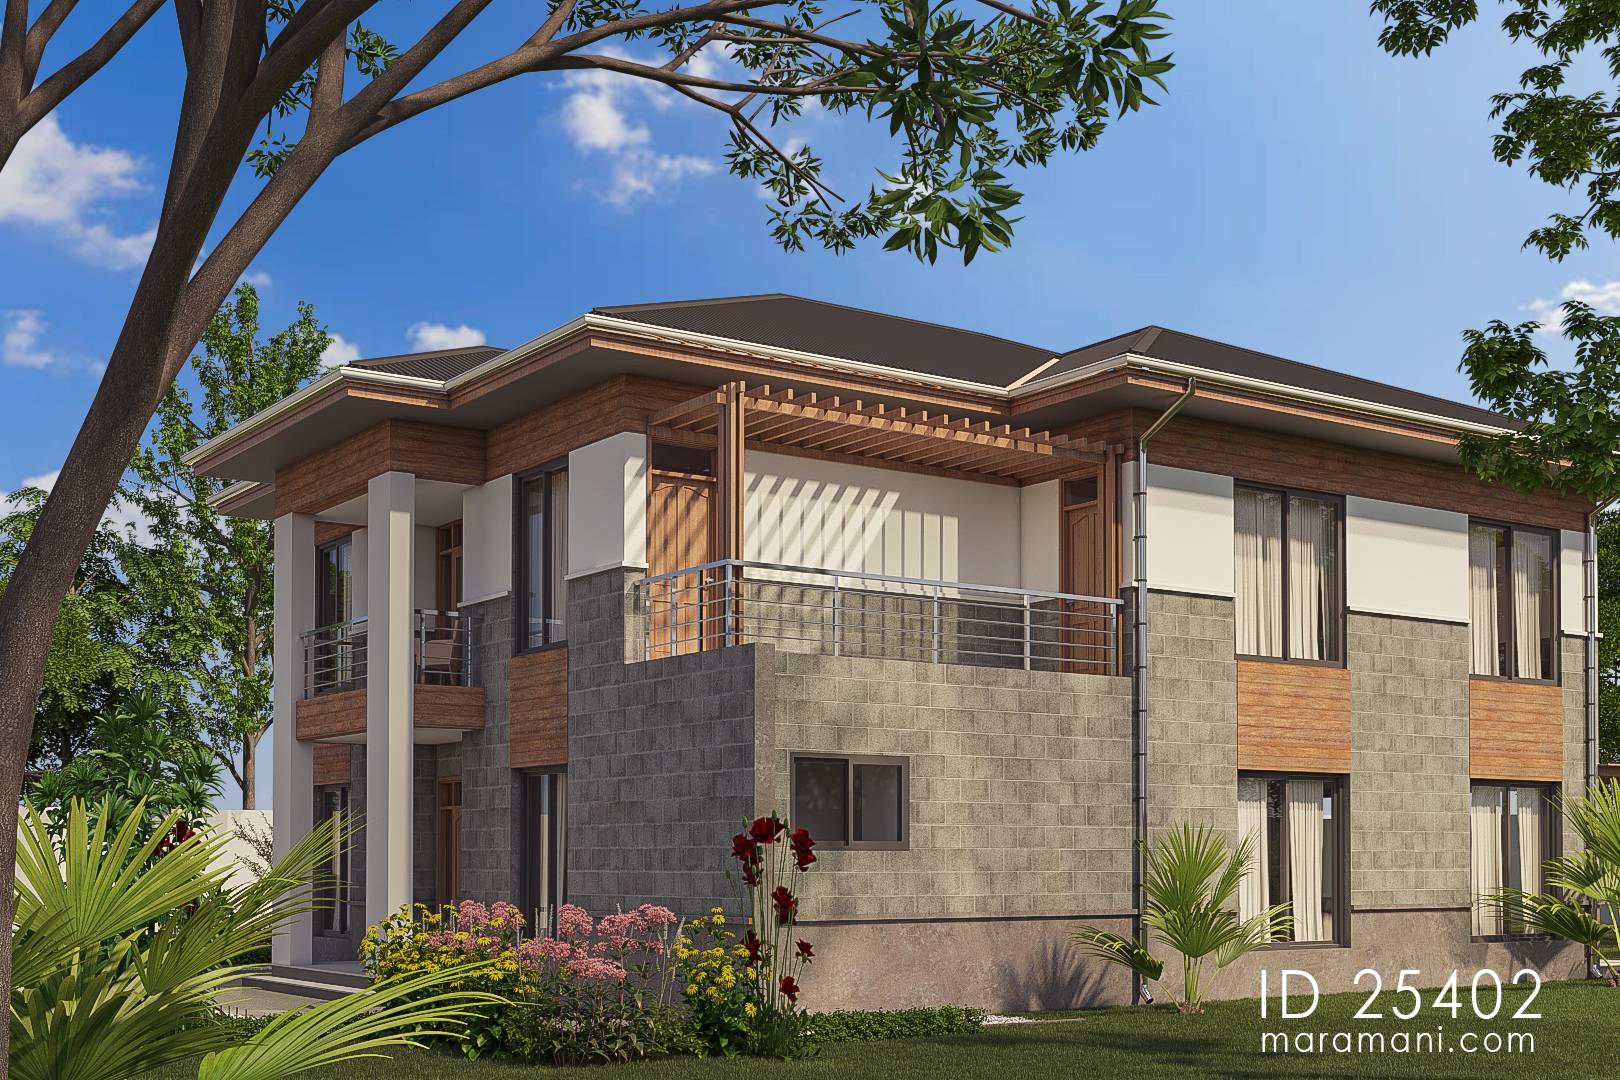 Contemporary 5 Bedroom House Plan - ID 25402